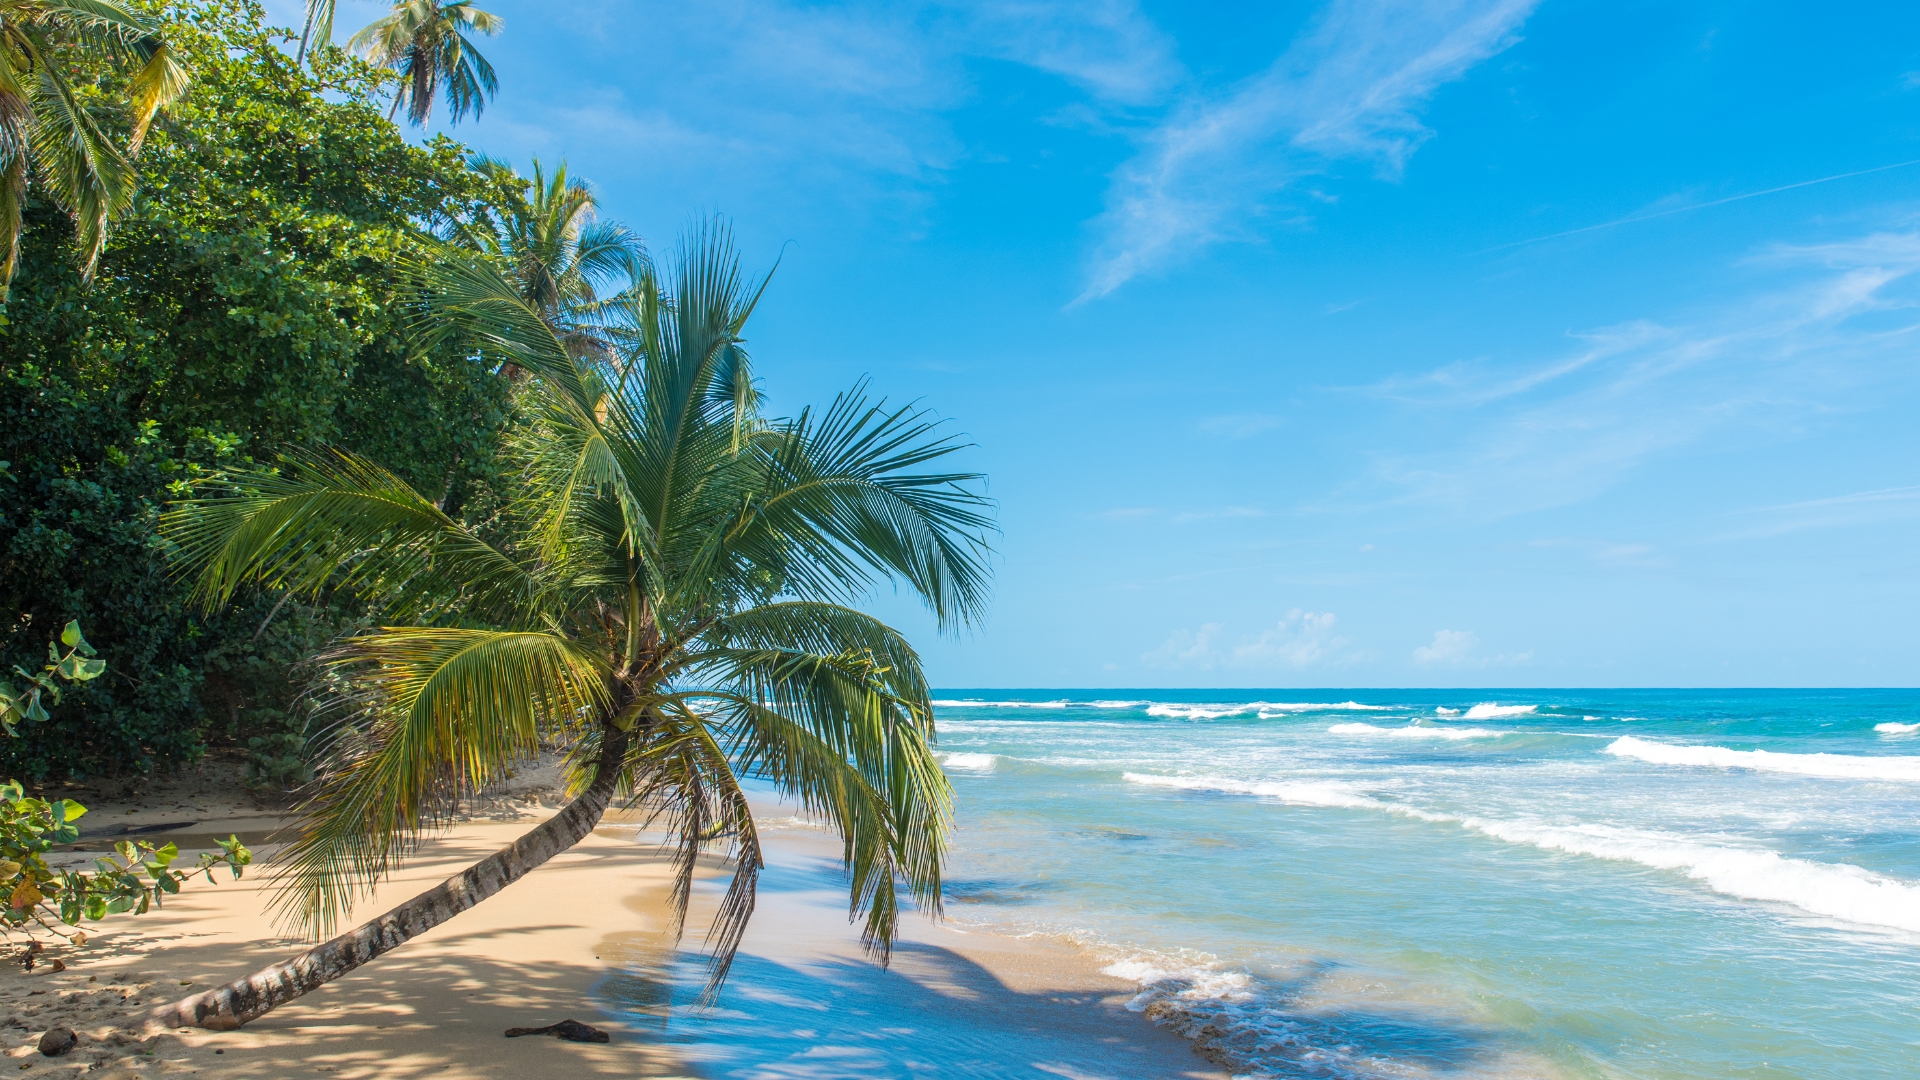 Exotic beach in Costa Rica with palm trees and turquoise blue water.